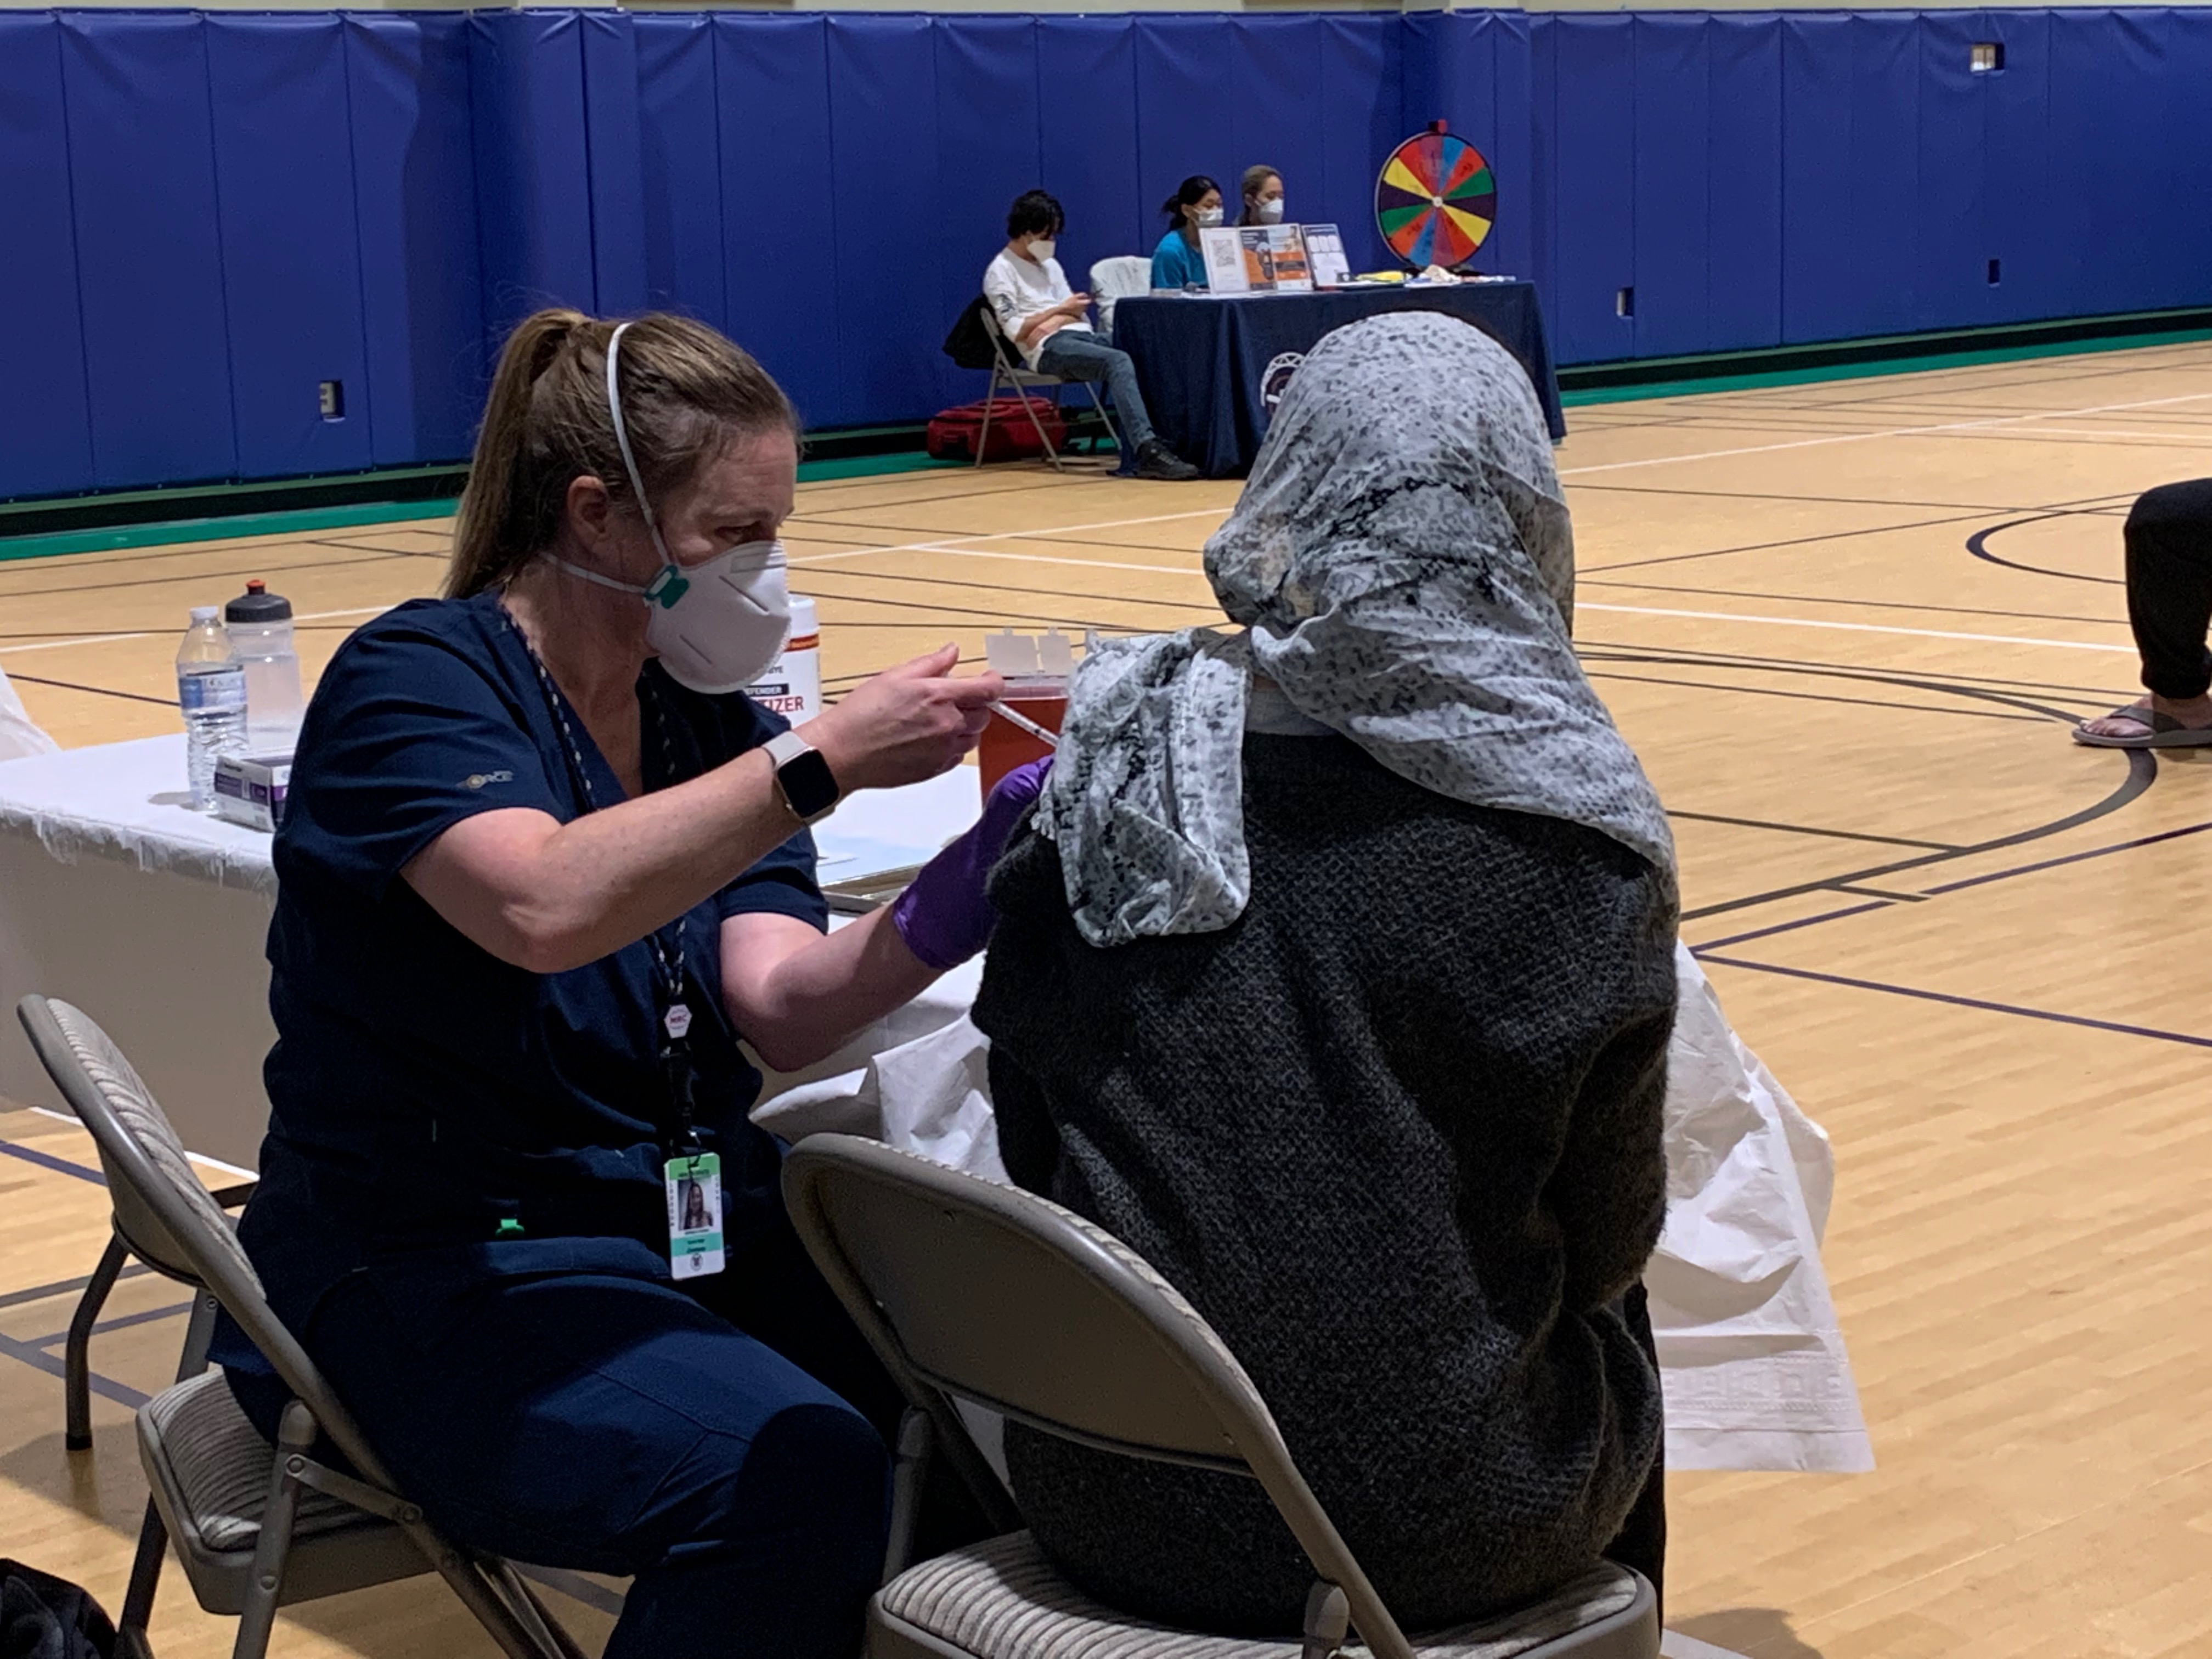 A healthcare worker administers a vaccination into the upper left arm of a person wearing a hijab at a table in an indoor gym.